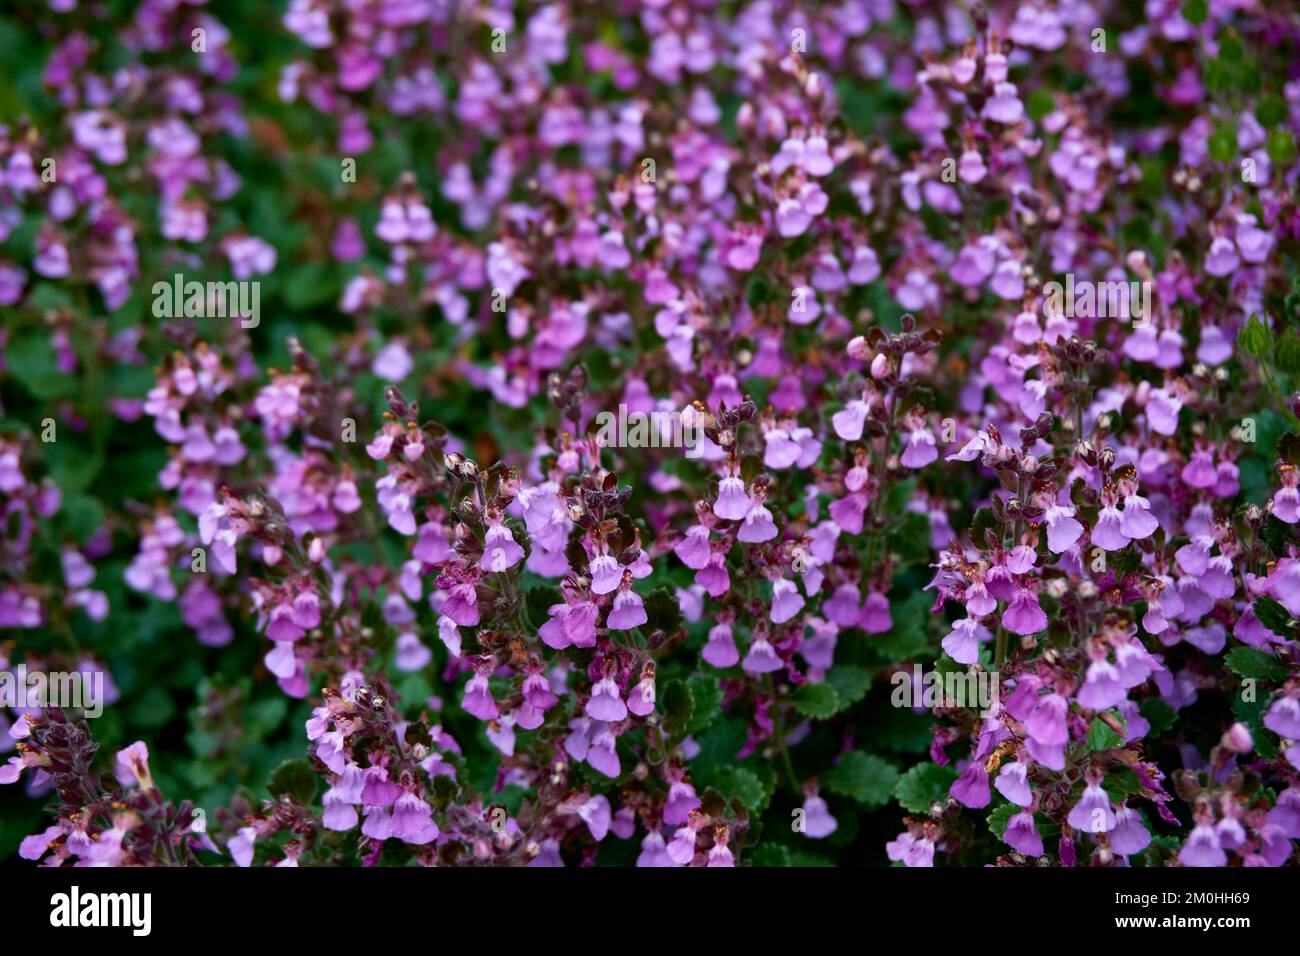 Flowers of Wall Germander, Teucrium chamaedrys. Stock Photo